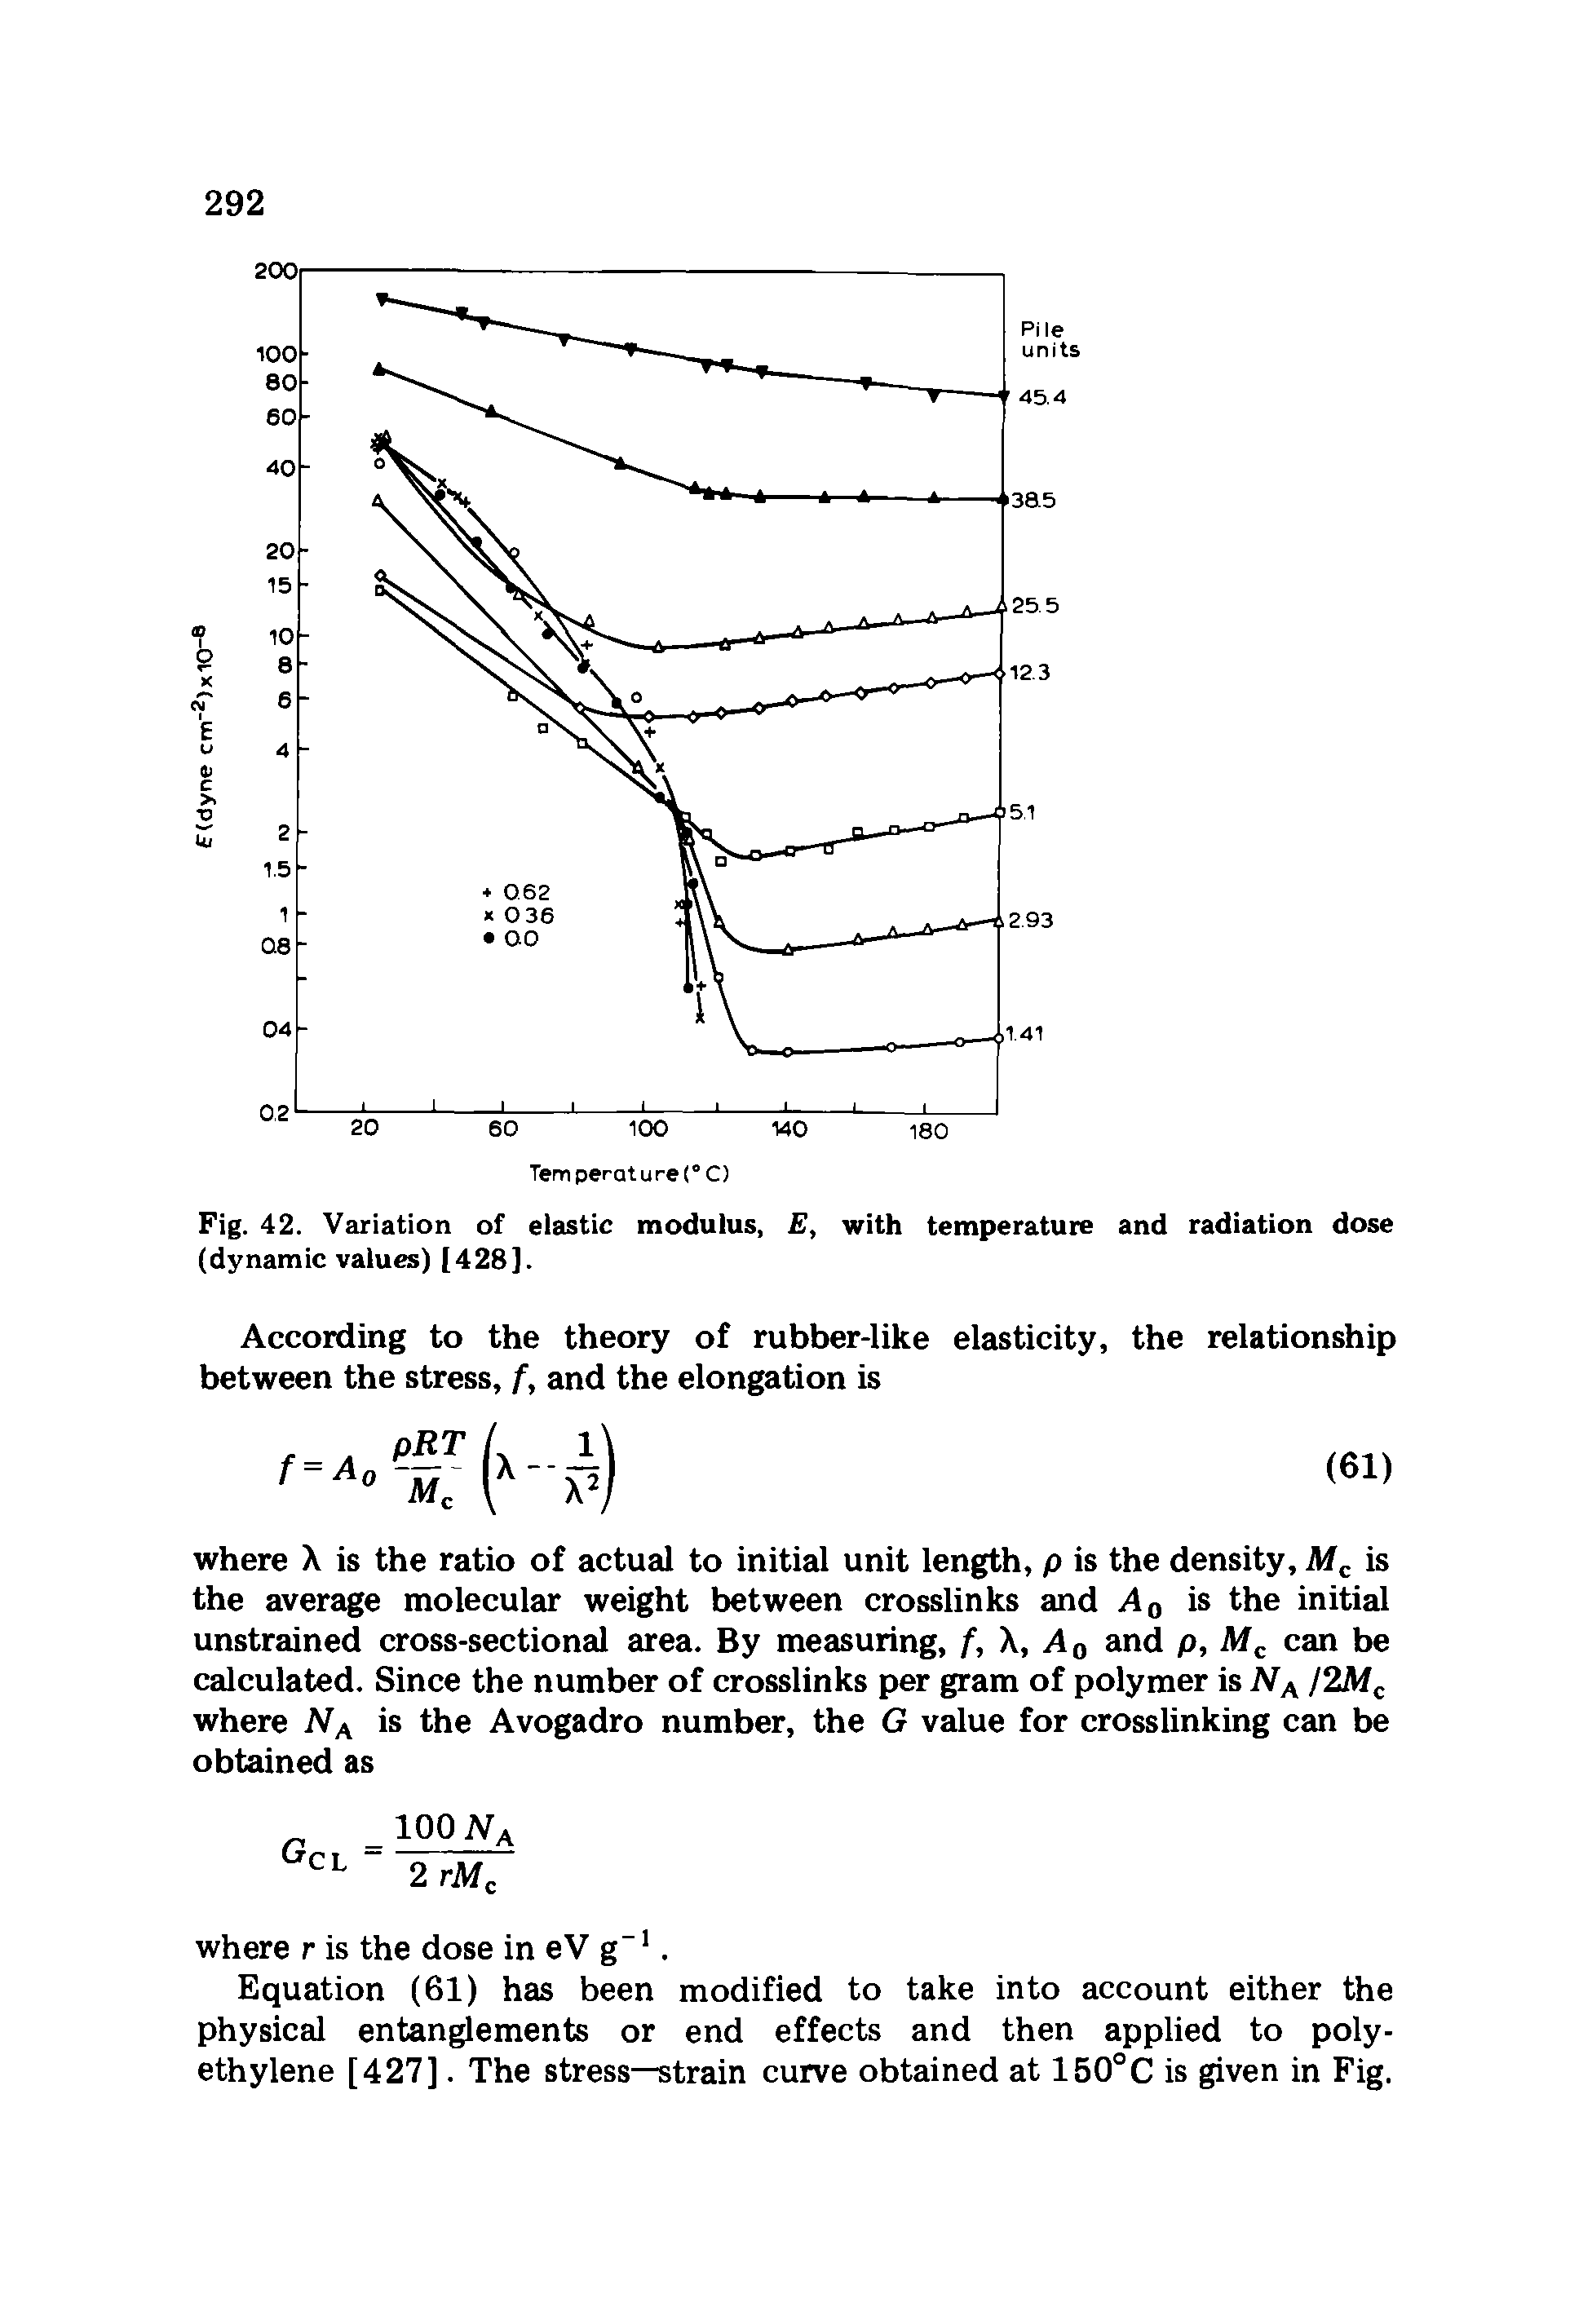 Fig. 42. Variation of elastic modulus, E, with temperature and radiation dose (dynamic values) [428].